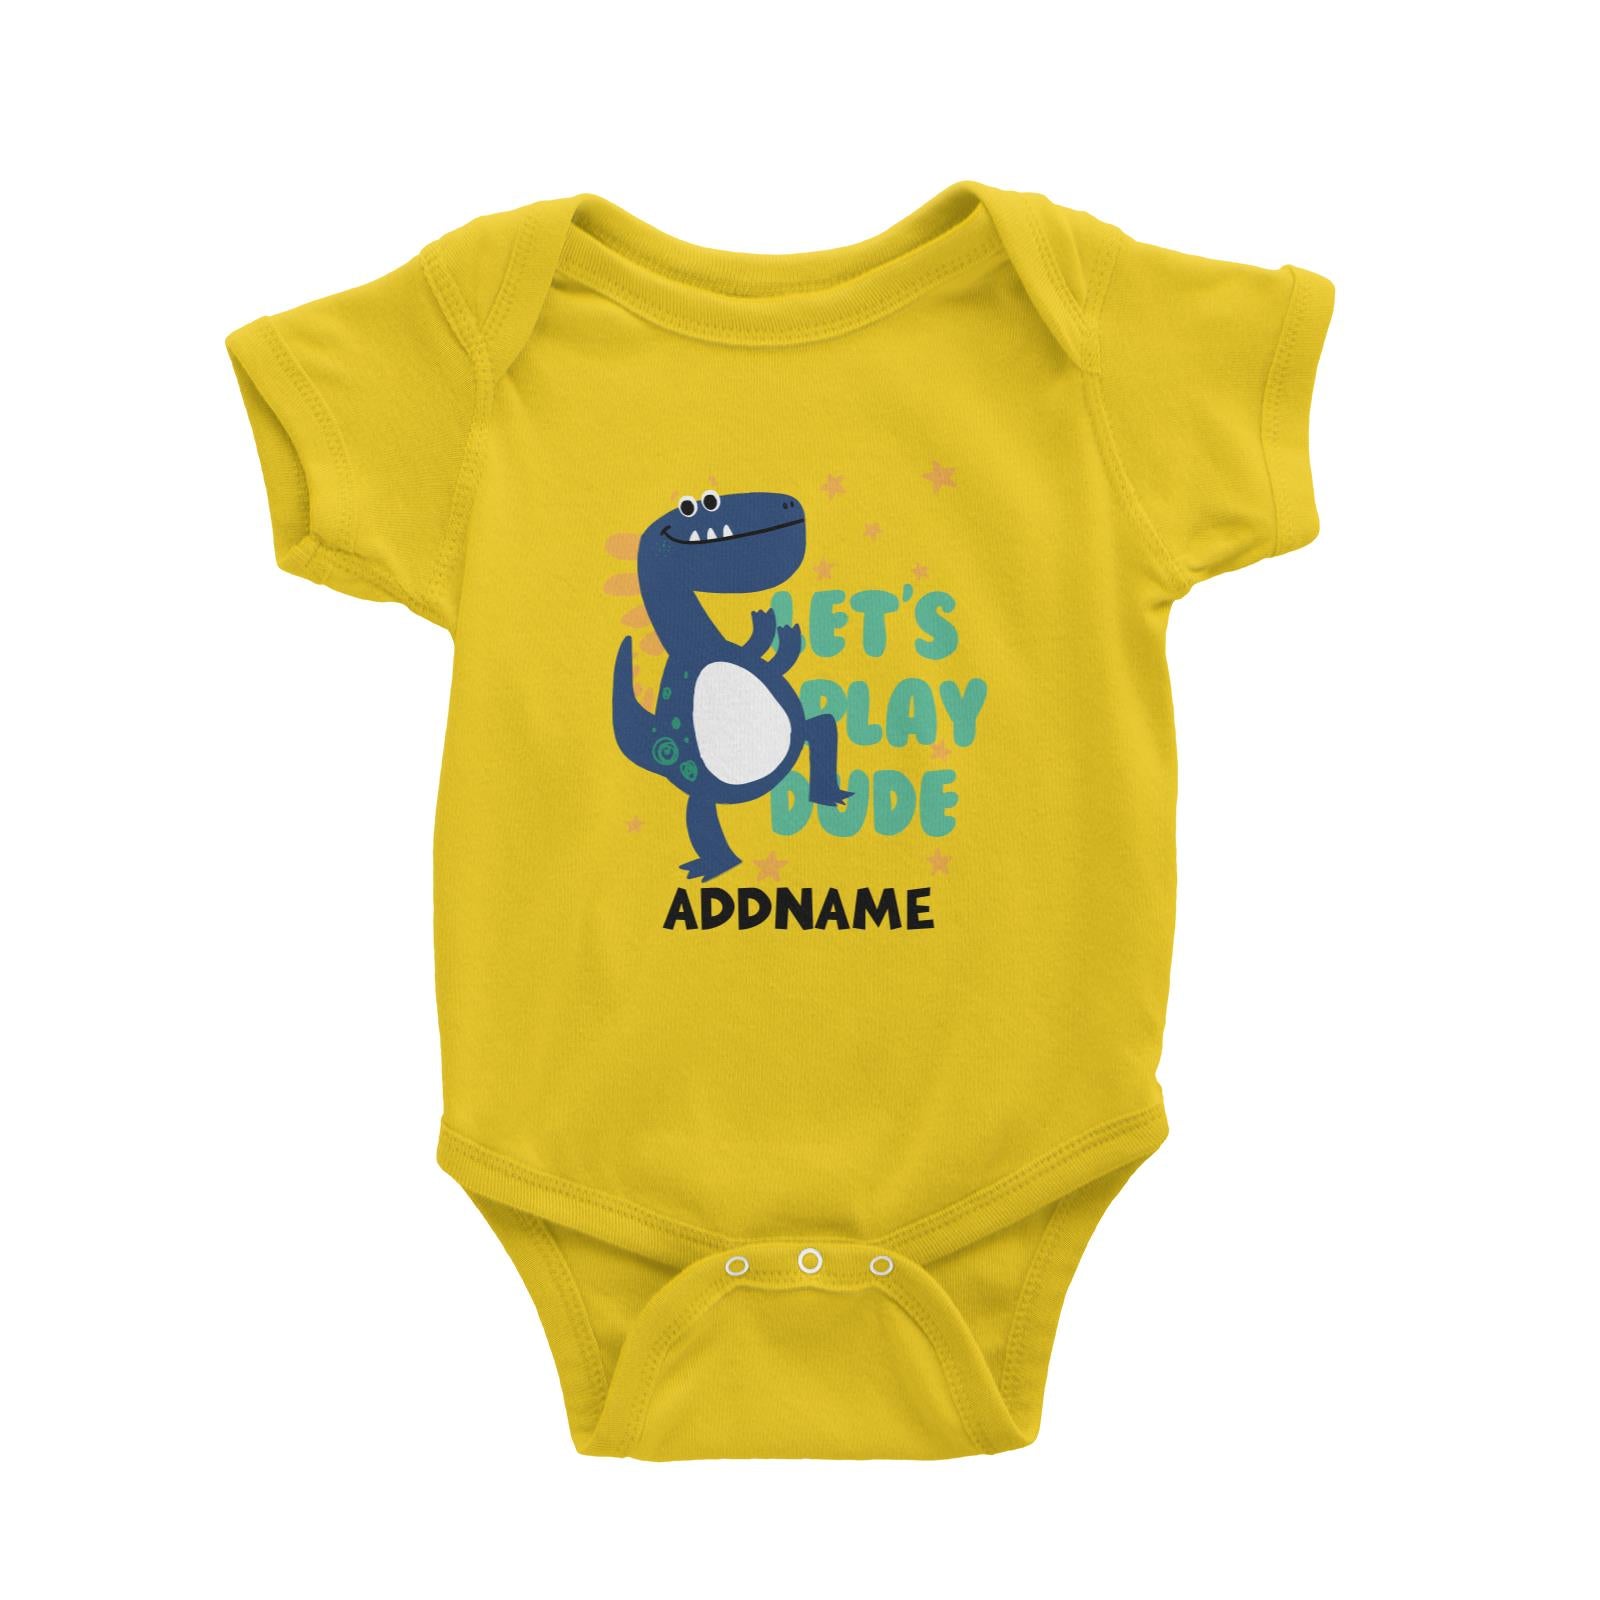 Let's Play Dude Dinosaur Addname Baby Romper